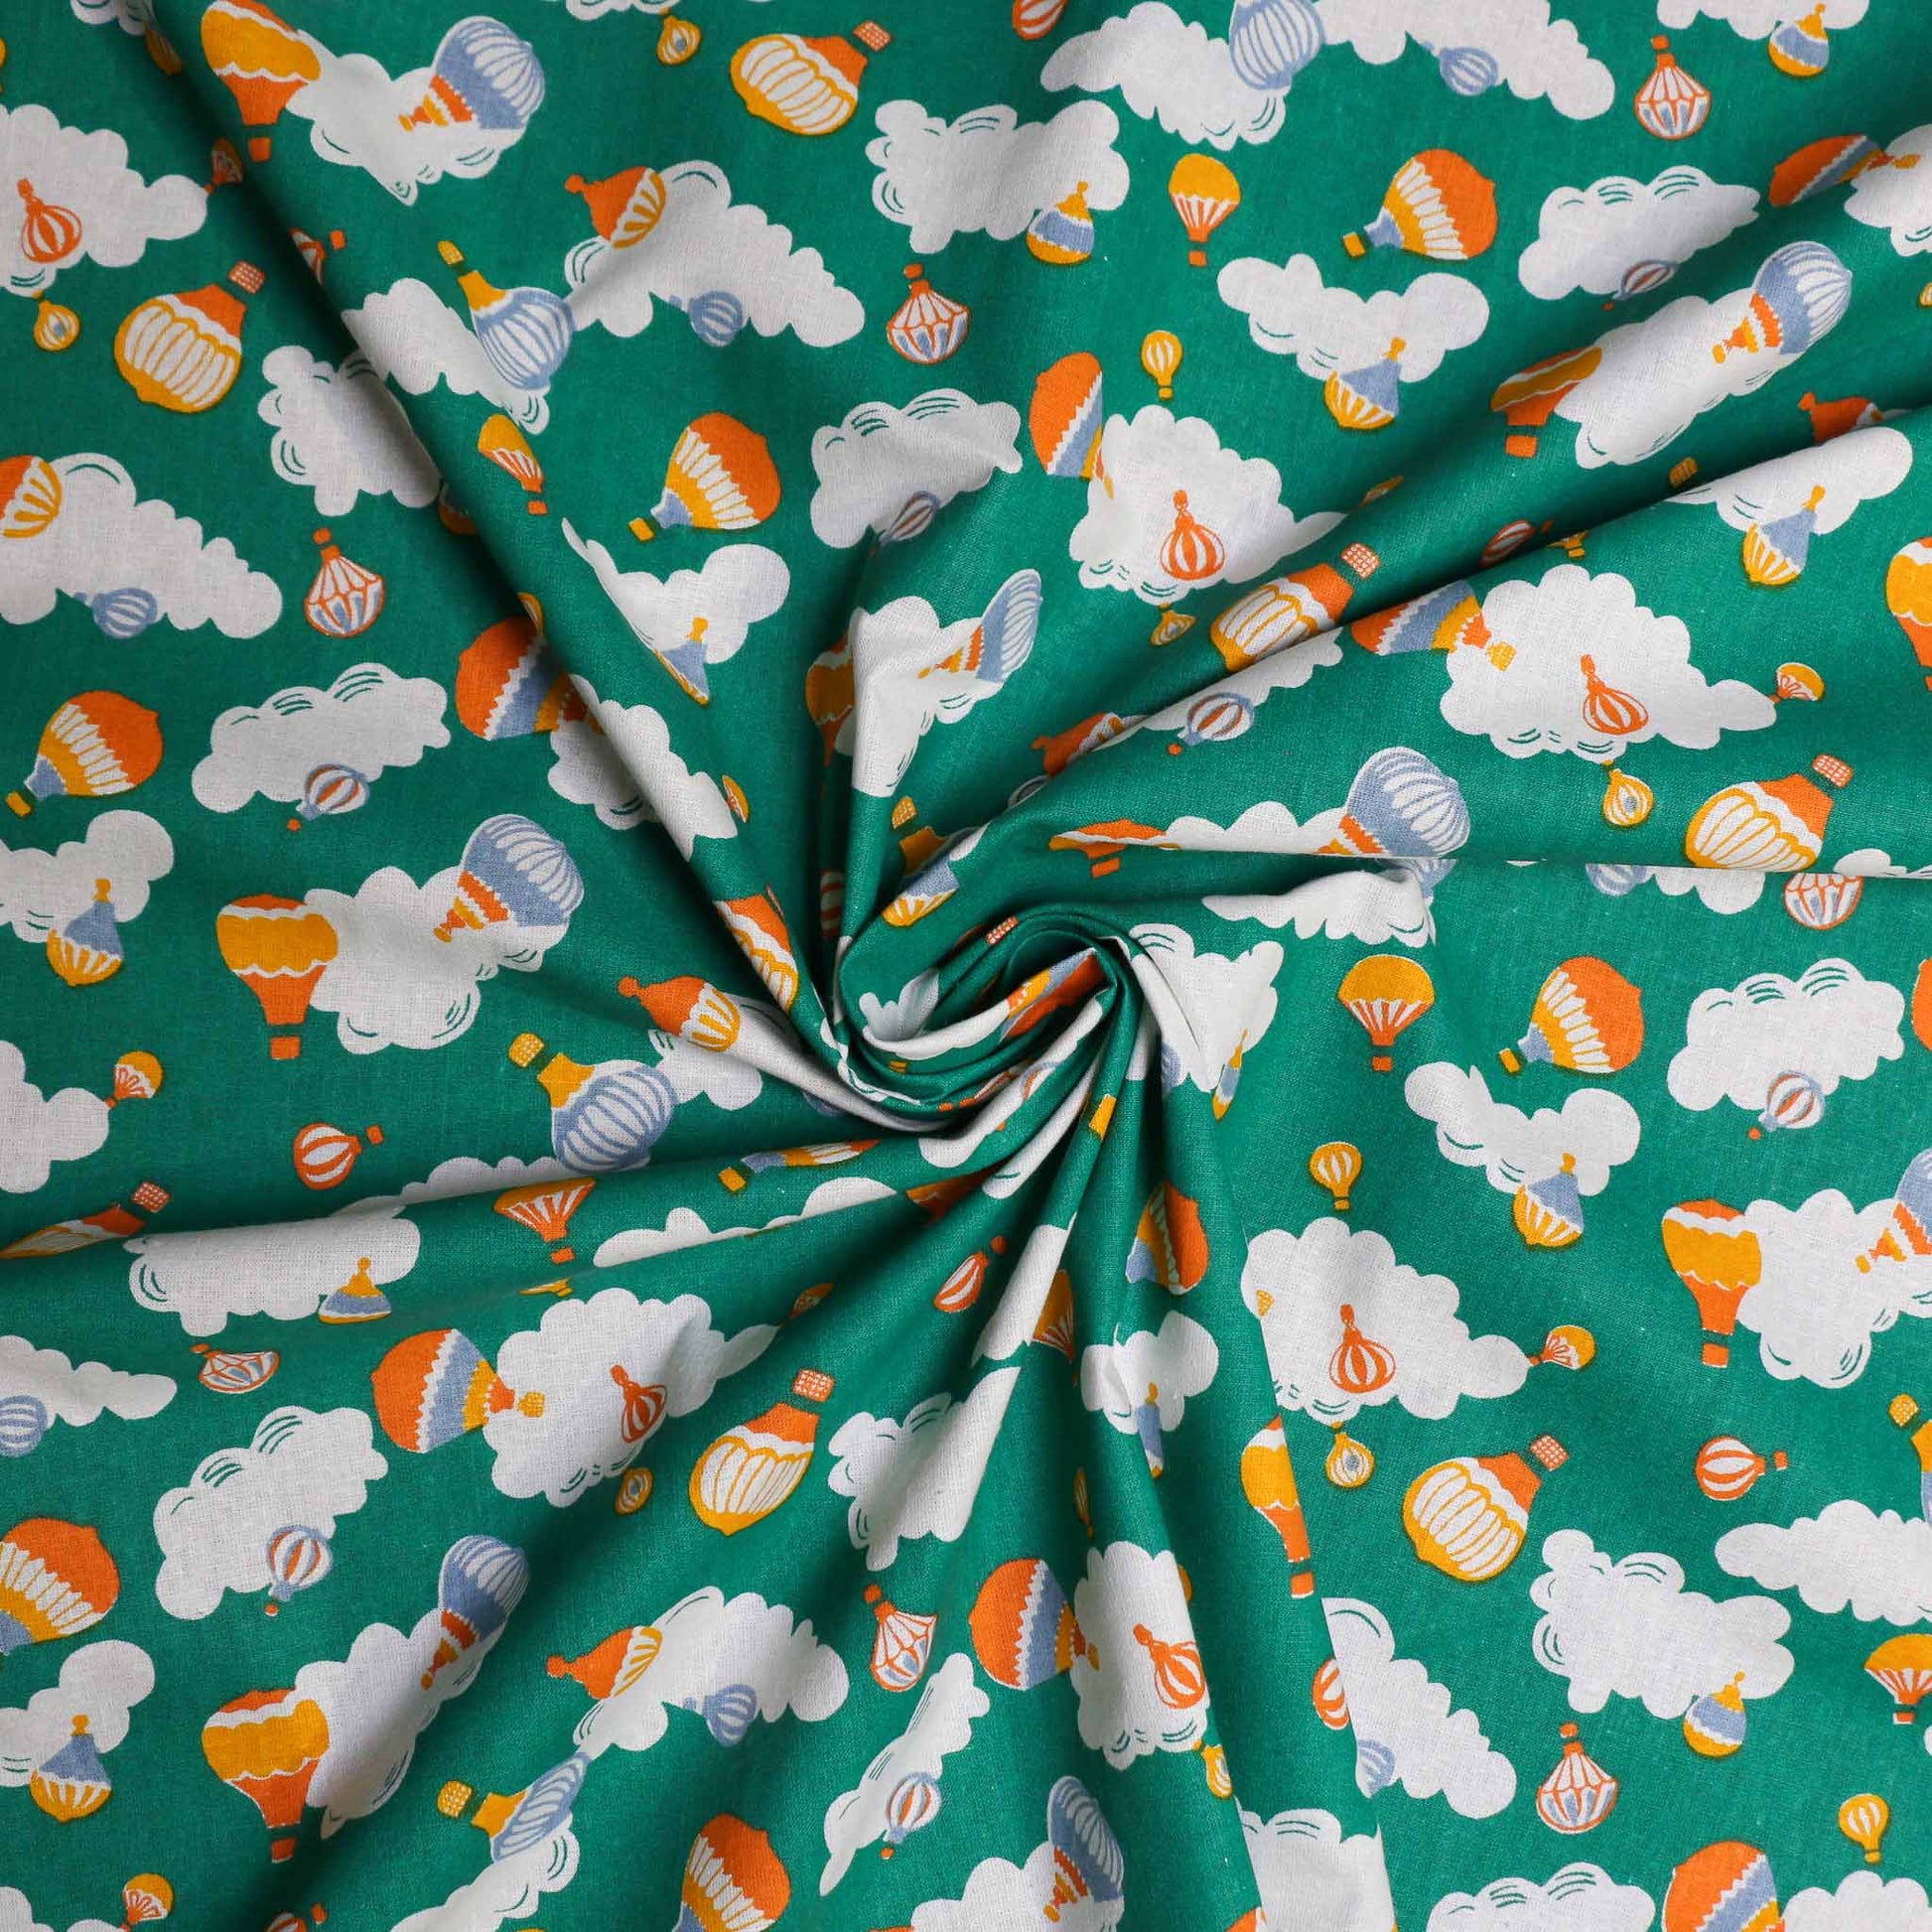 sustainable retro green cotton poplin dressmaking fabric with hot air balloon clouds print